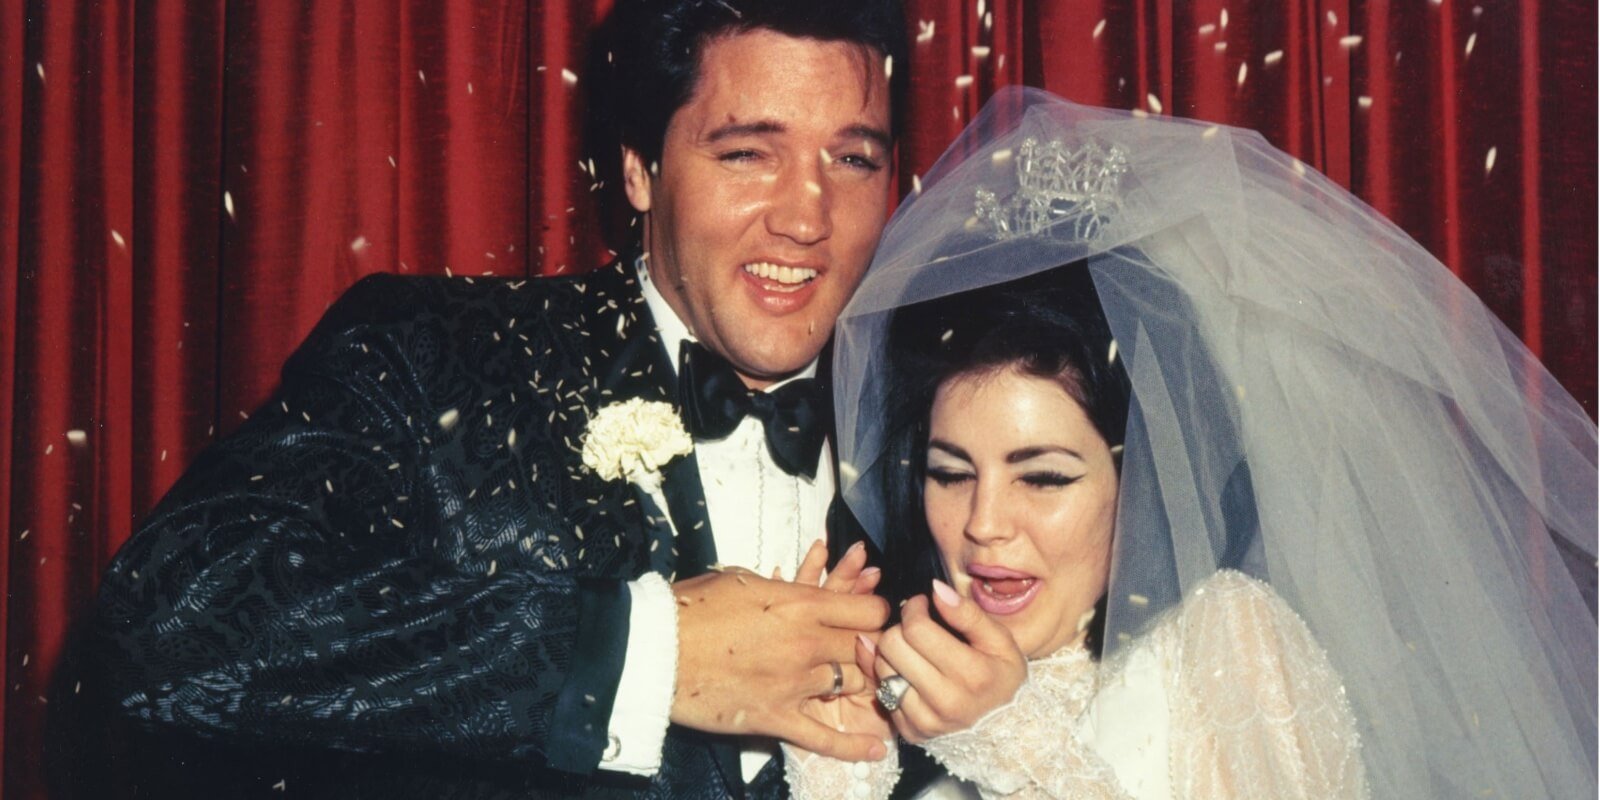 Elvis and Priscilla Presley on their wedding day, May 1, 1967.